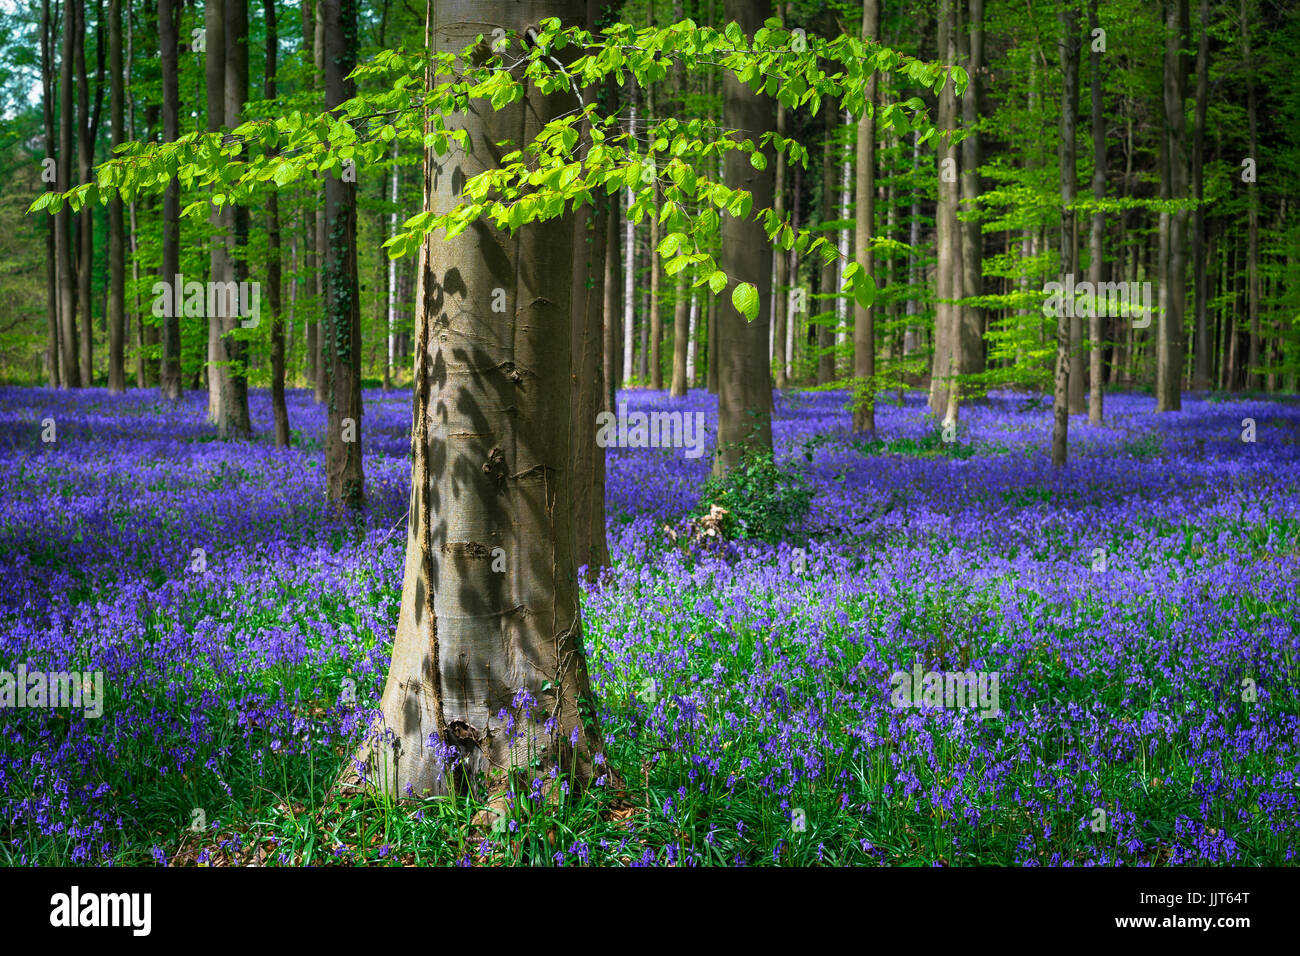 Magical Belgian Hallerbos turns into a sea of wild bluebells every spring. The fresh green leaves of the beech trees provide a colorful contrast. Stock Photo